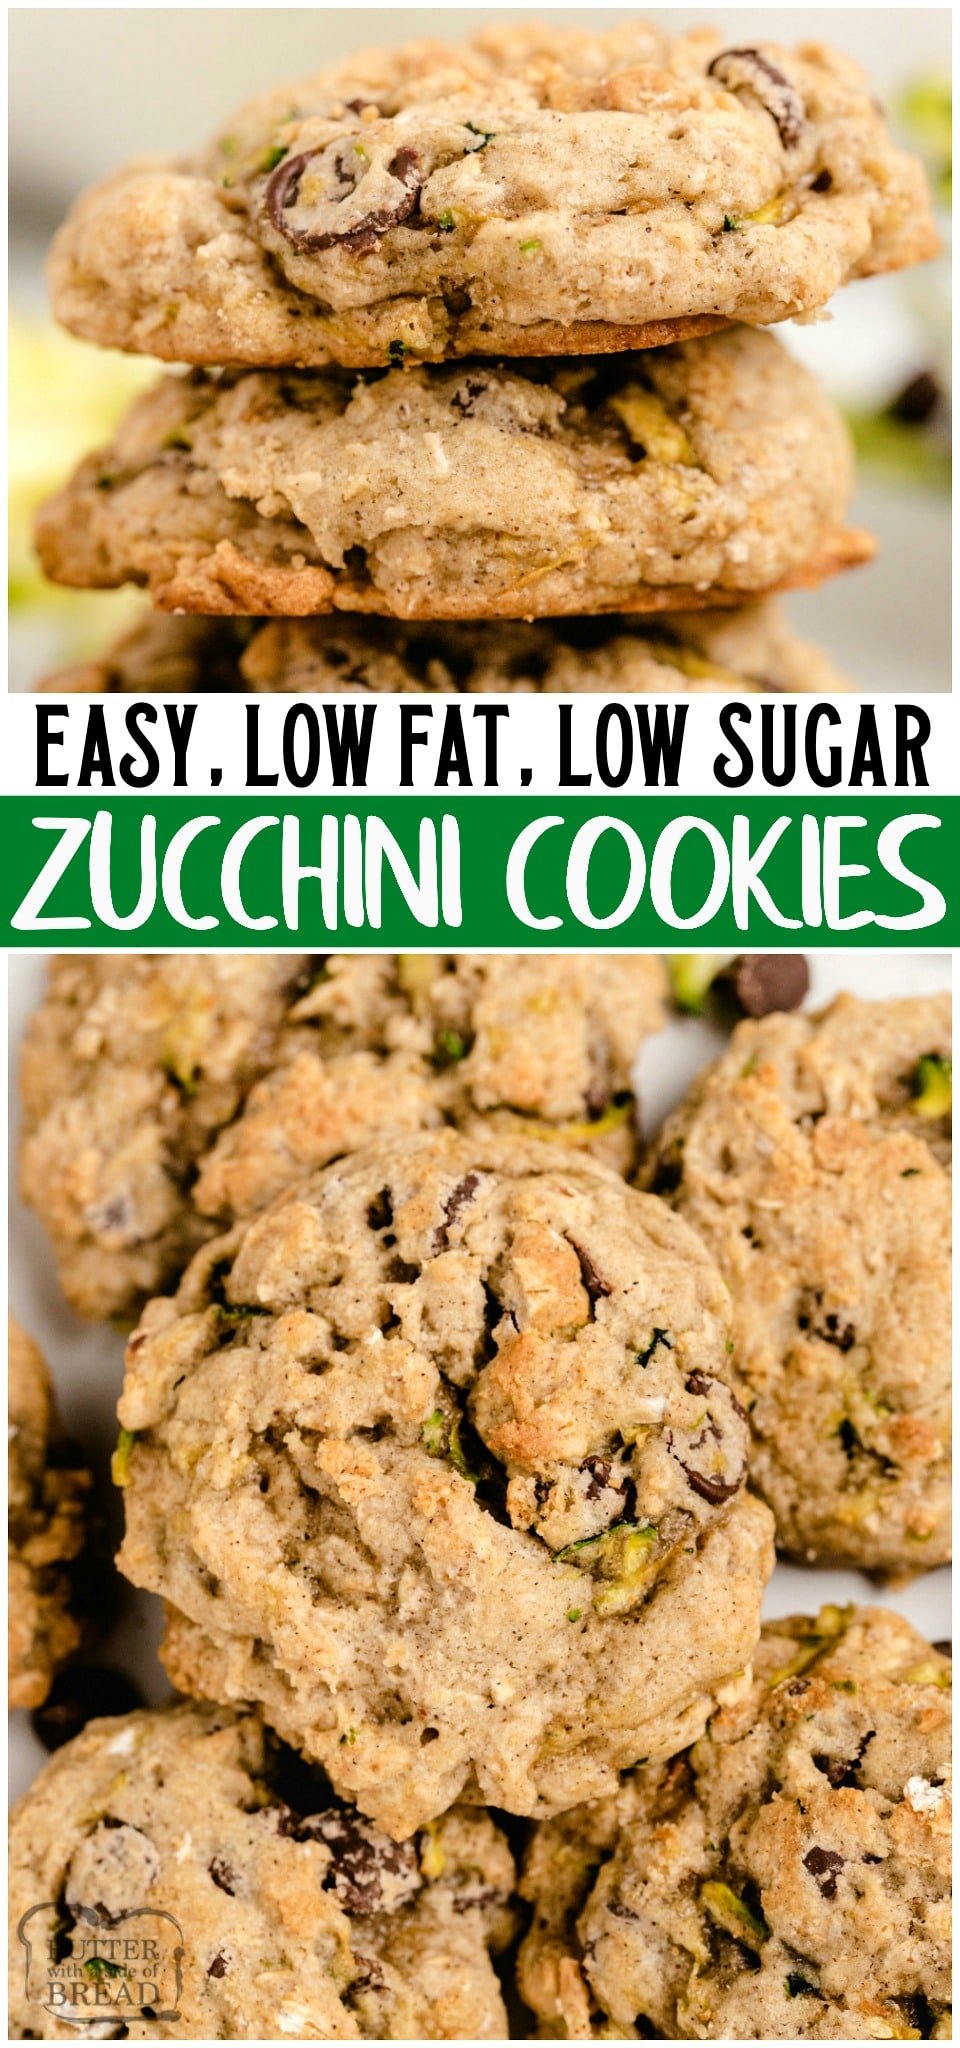 Zucchini Cookies are zucchini bread in cookie form! Soft, perfectly sweet and lower in fat & sugar, these easy-to-make zucchini cookies taste incredible!